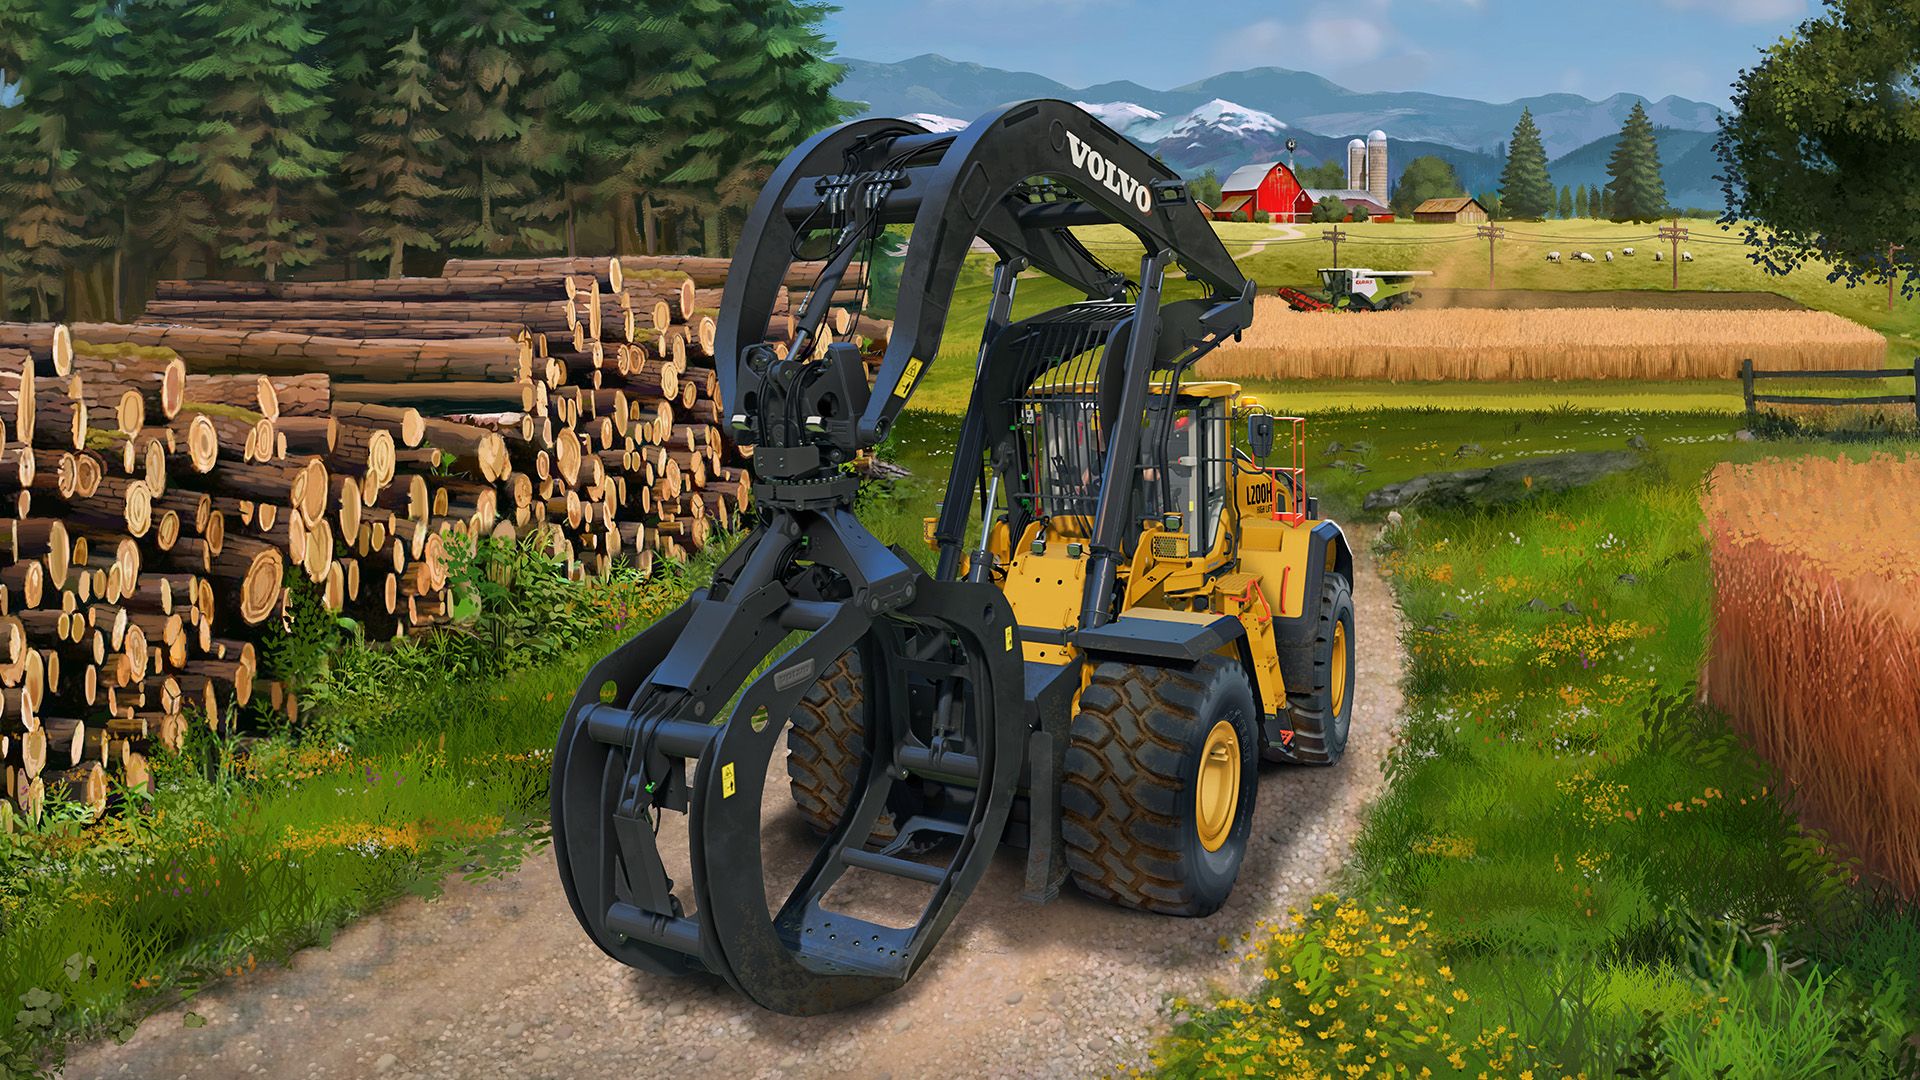 Lots of Content, Lots of Logging – Farming Simulator 22 is Growing